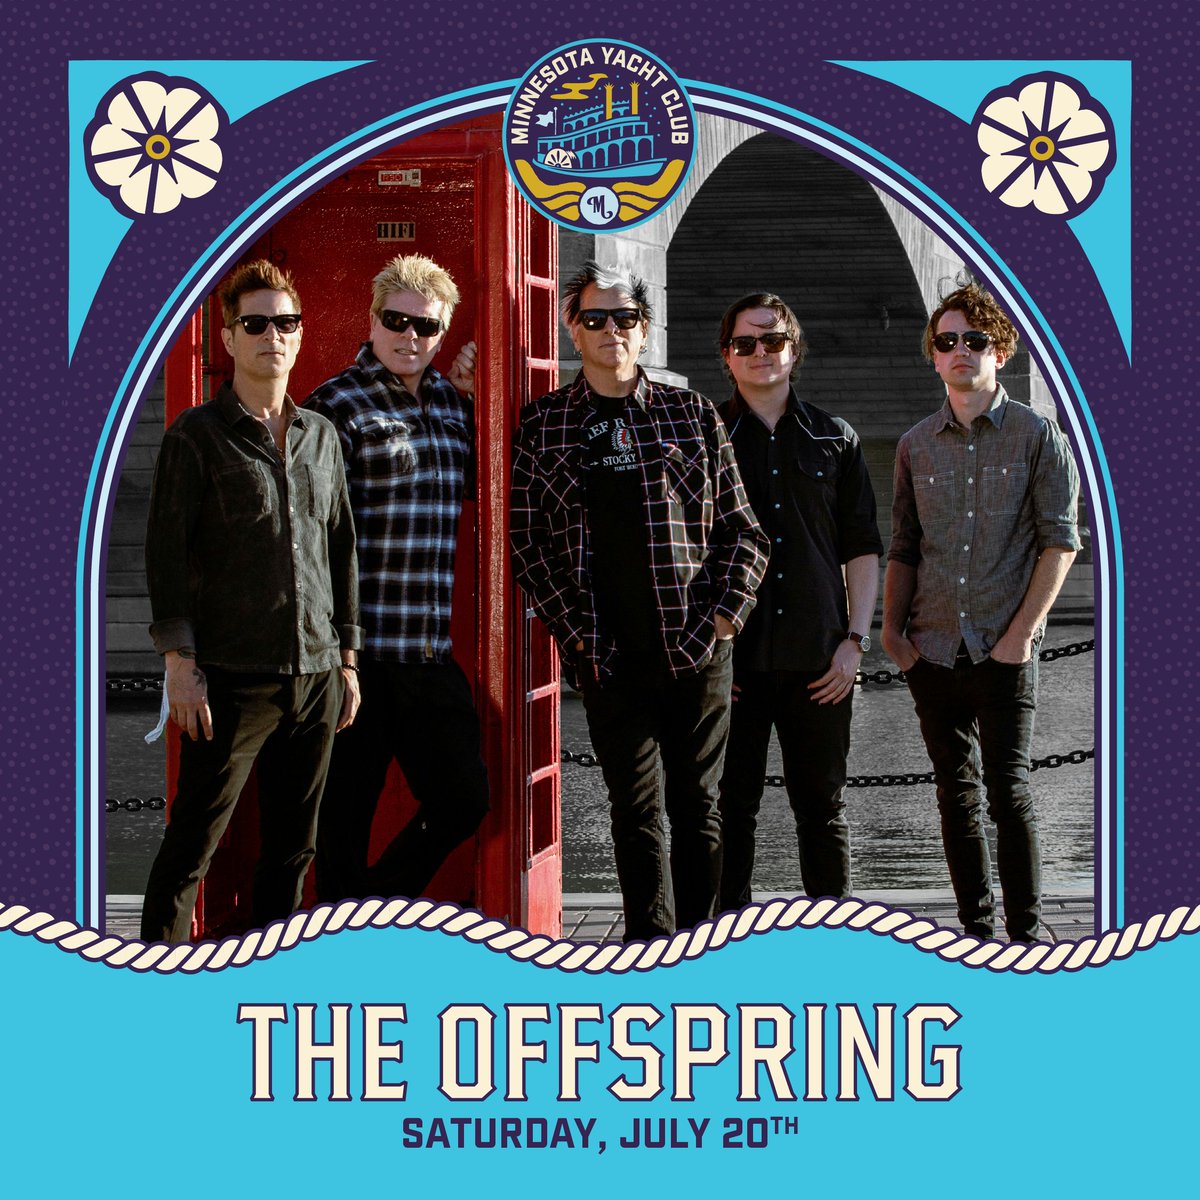 The Offspring will be a pretty fly set 🤘 Which songs are you ready to rock to?